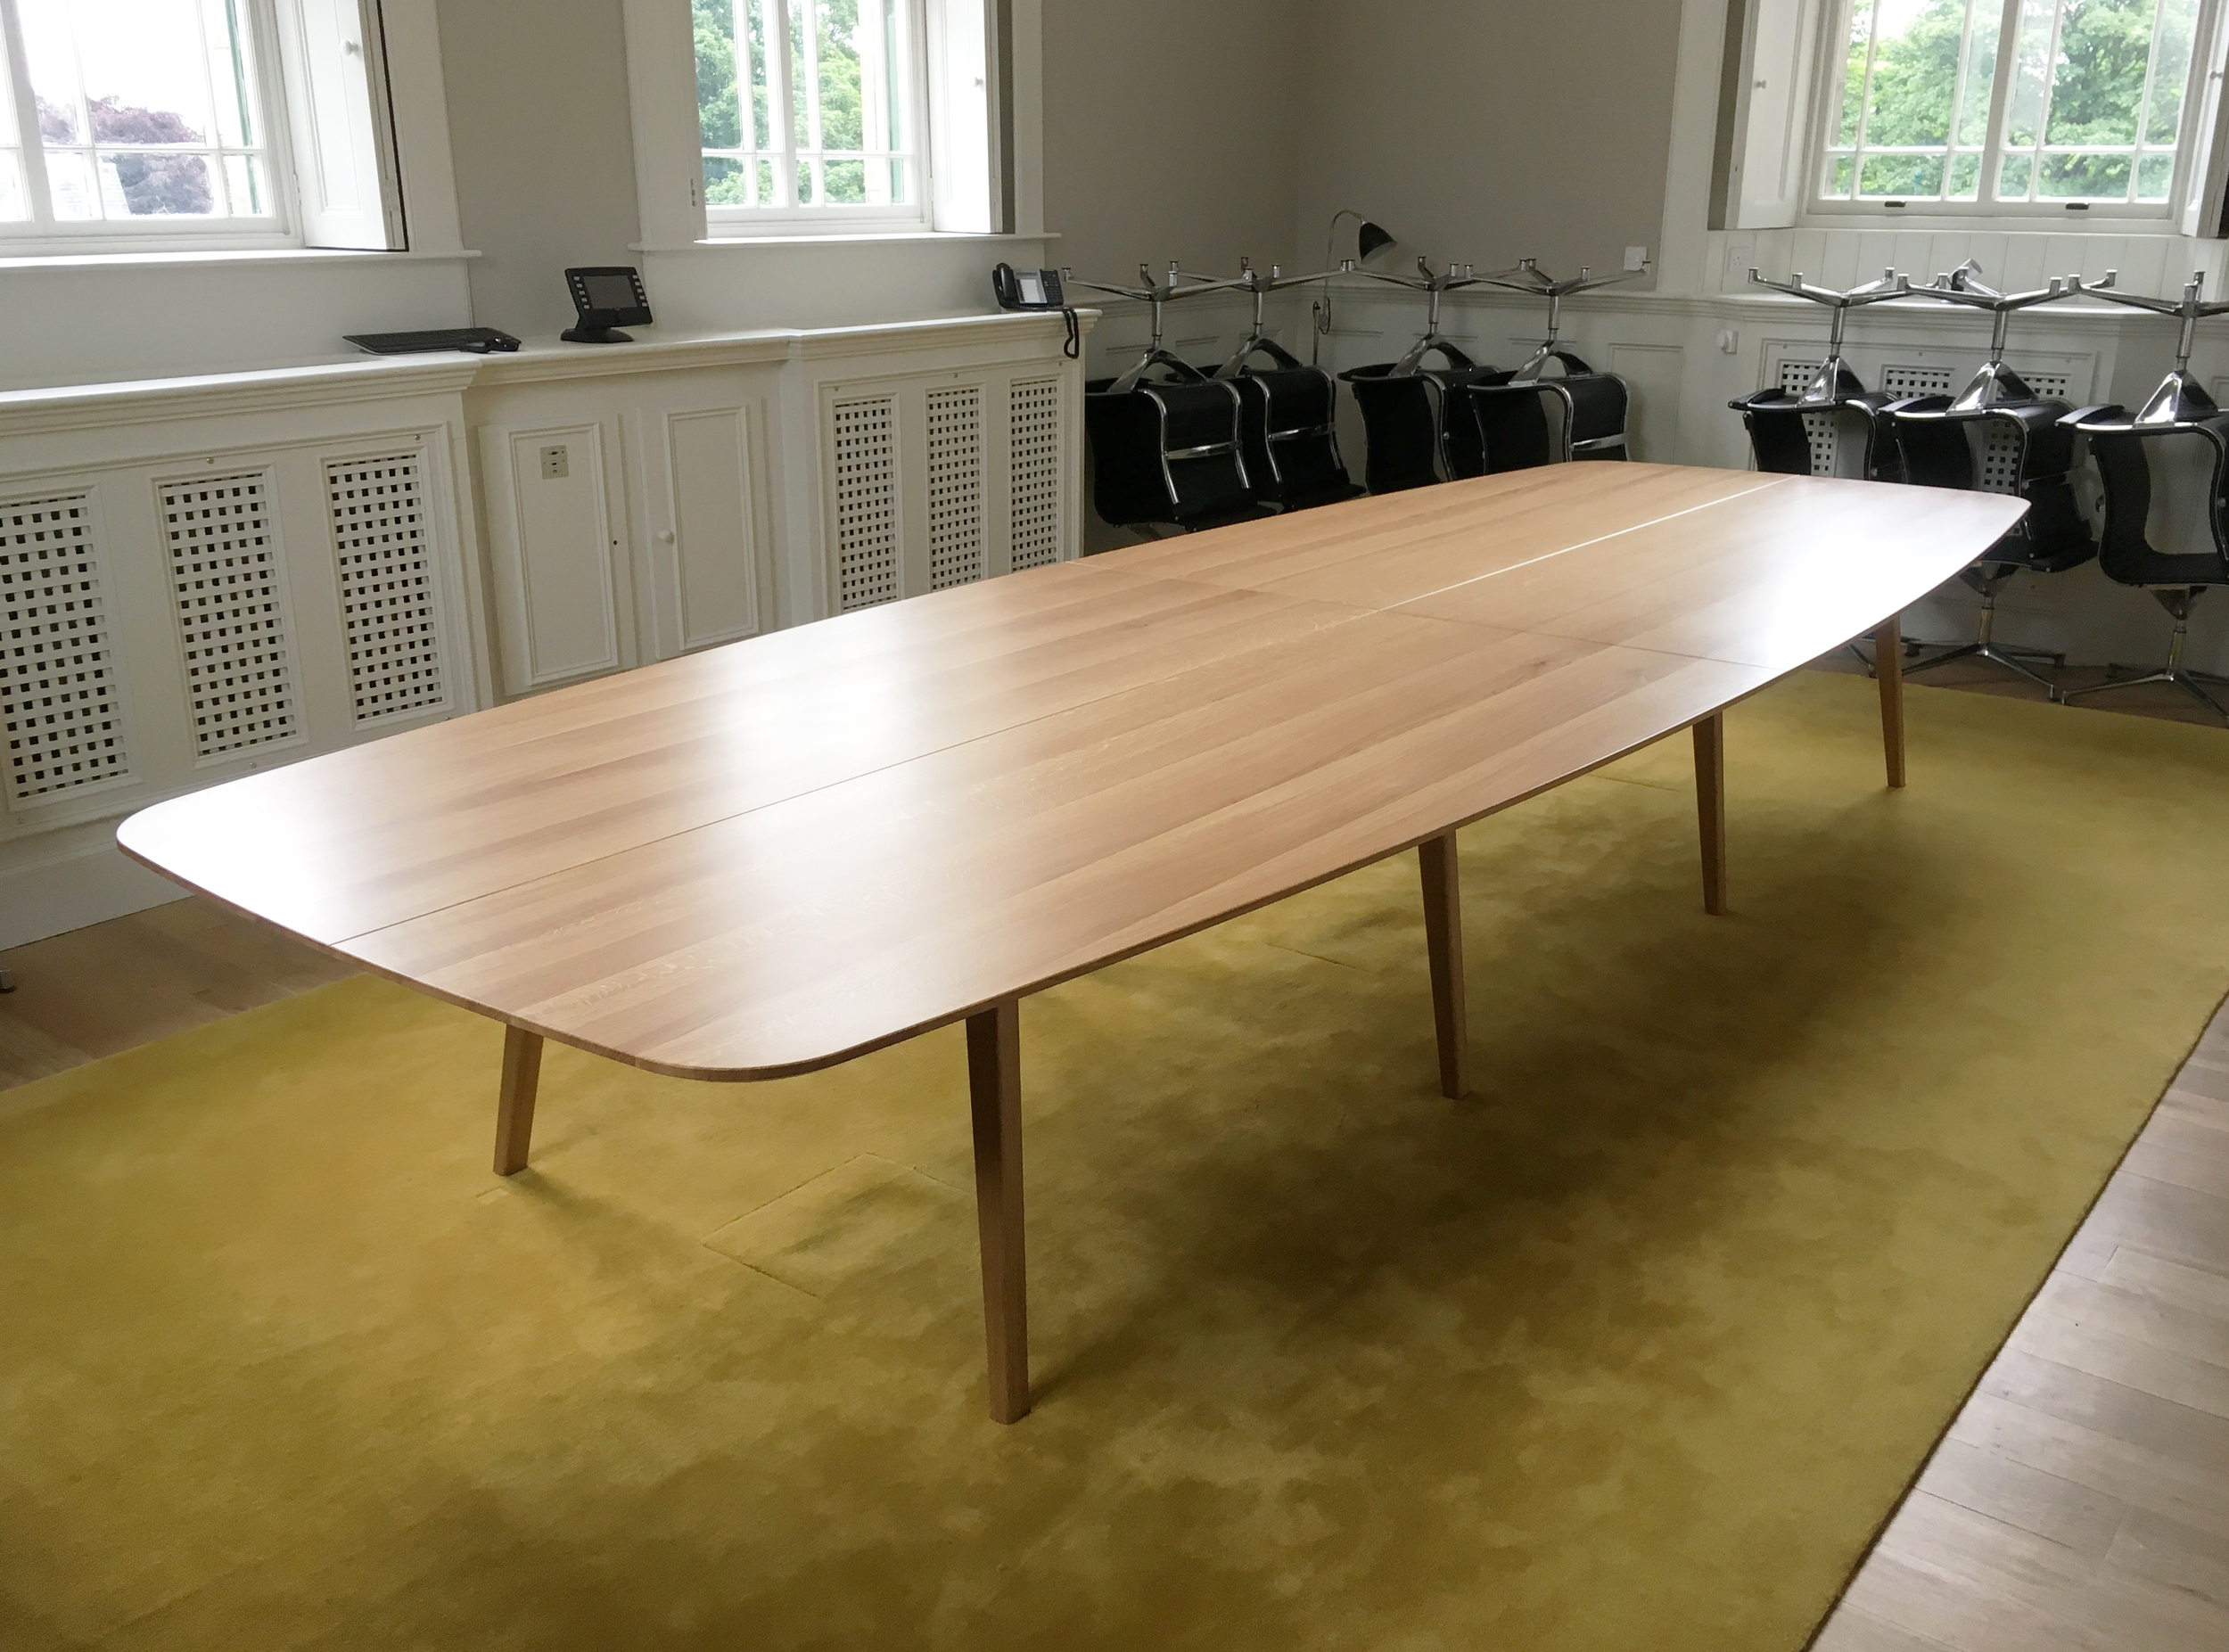 Bespoke commission for large boardroom table hand crafted in oak by furniture designer and maker Namon Gaston